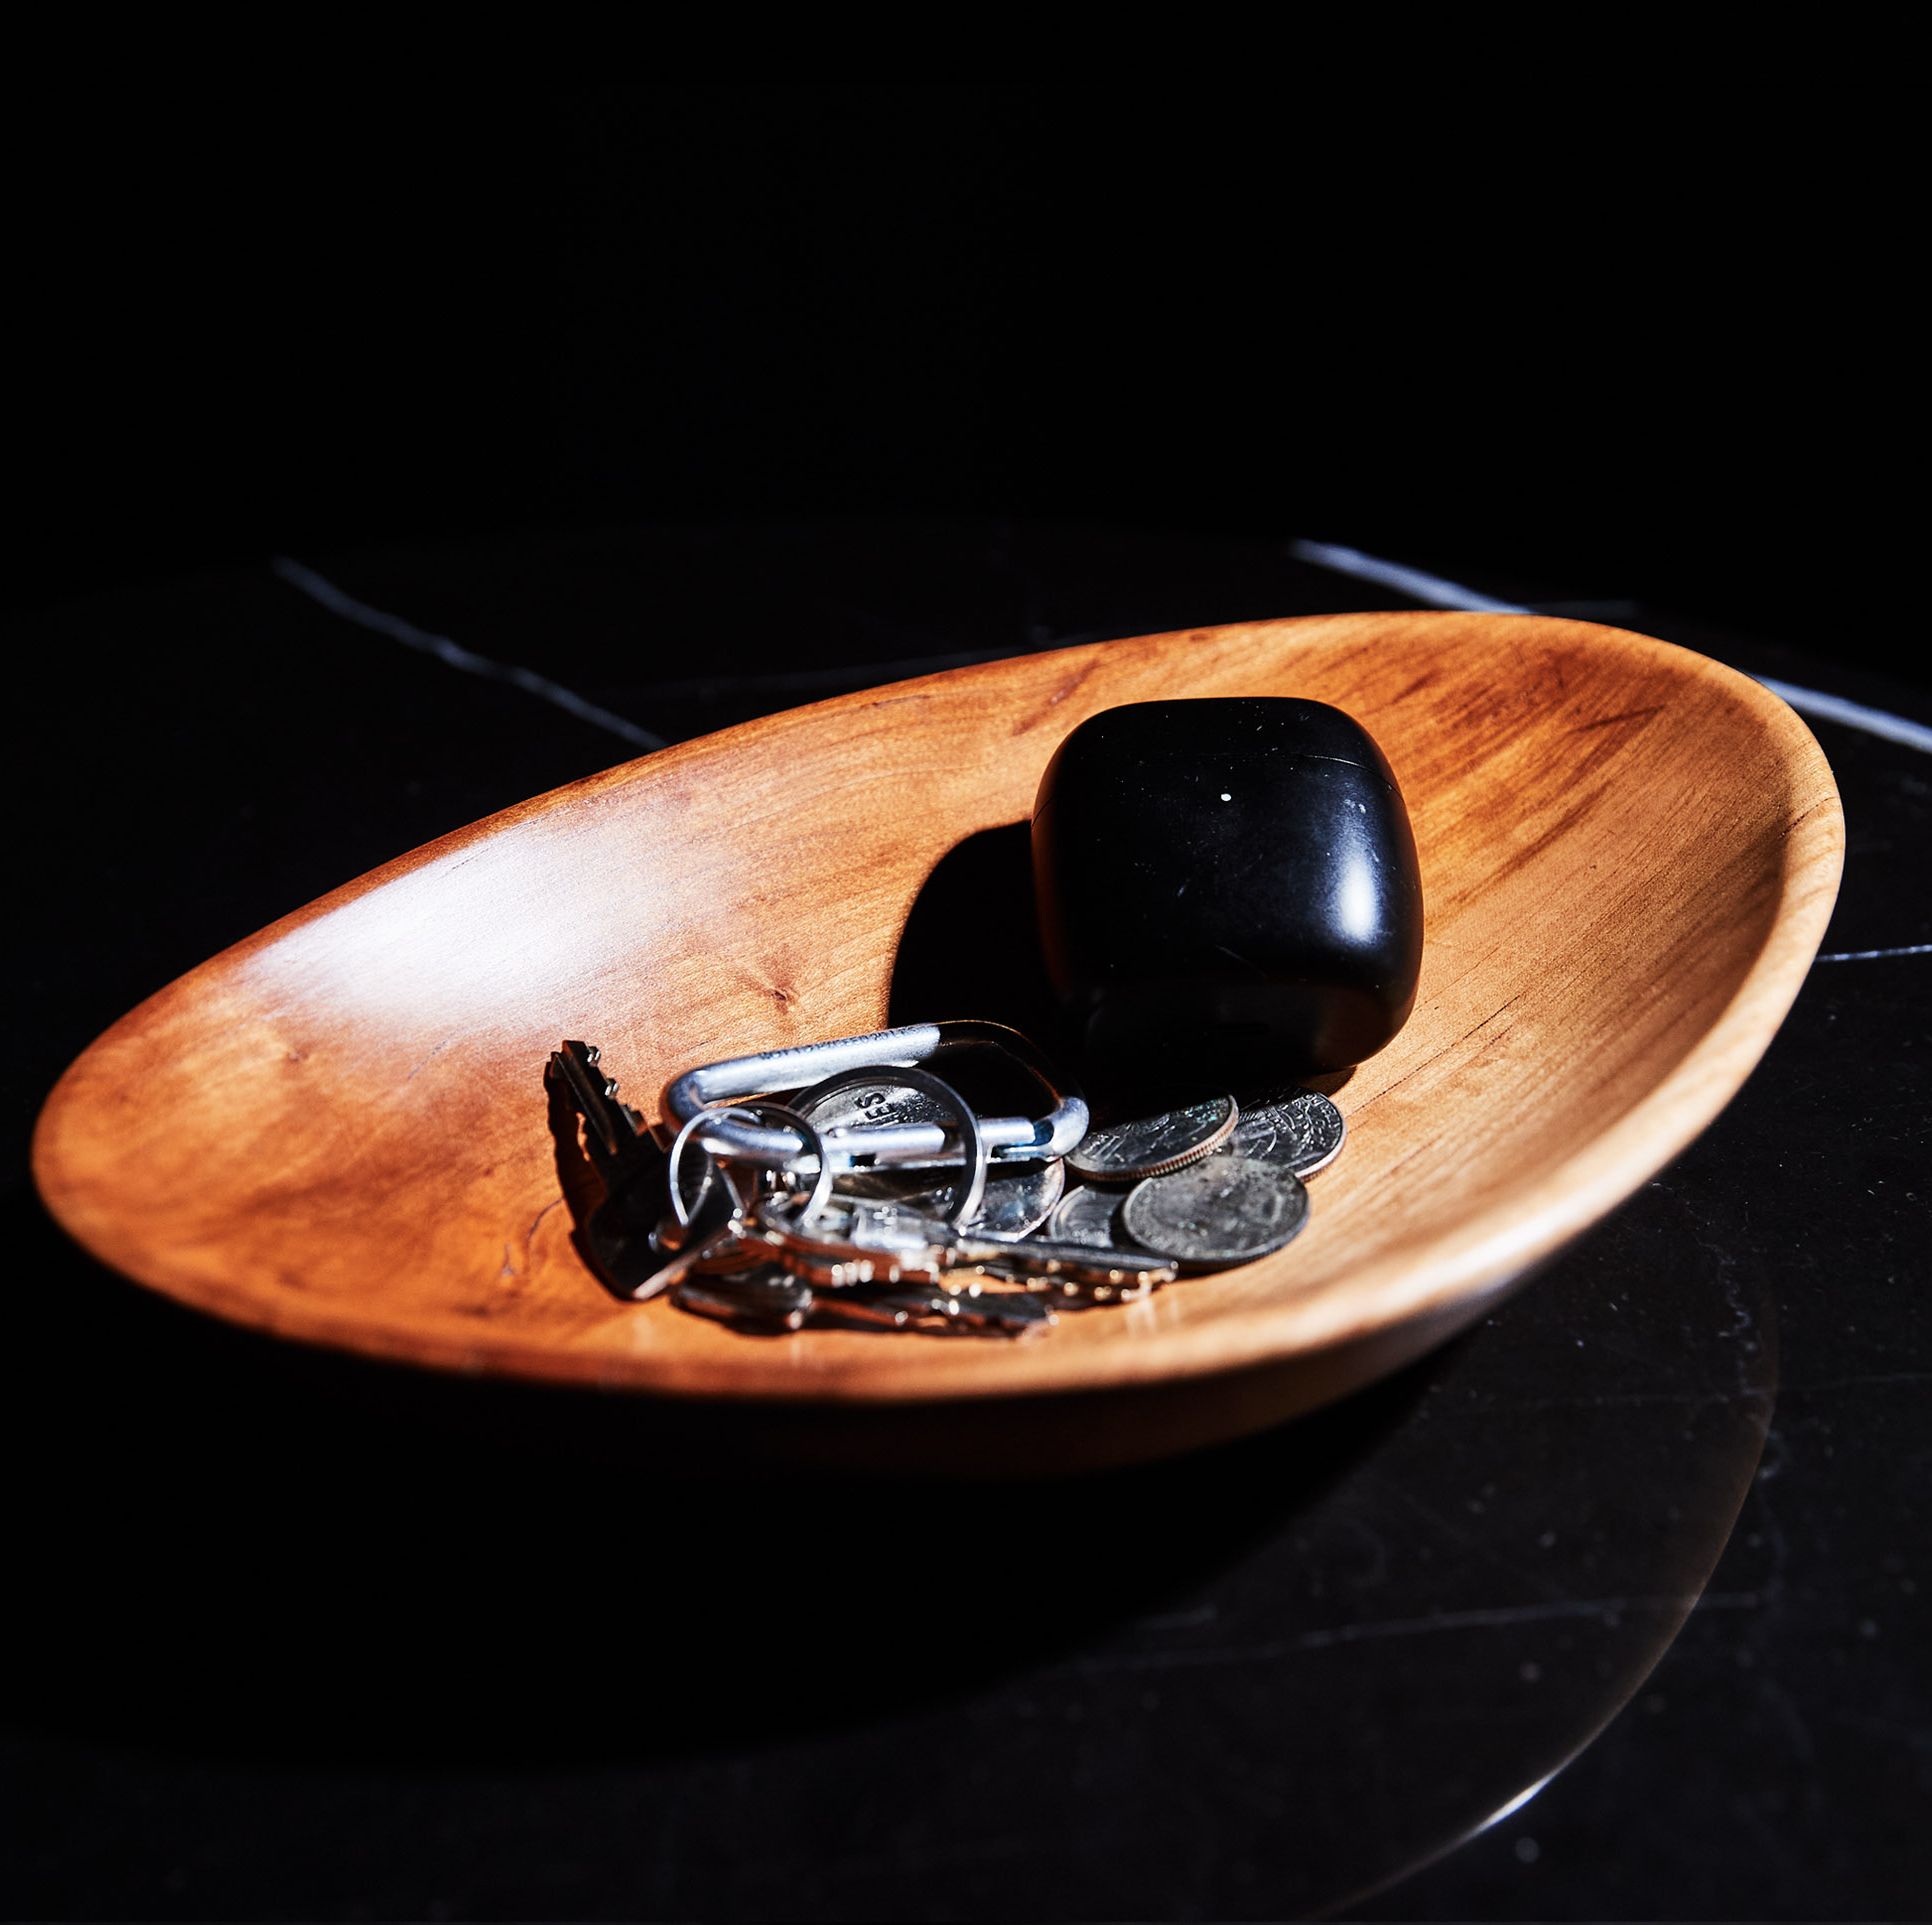 Have Some Scrap From Your Last Carpentry Project? Make This Wooden Bowl.